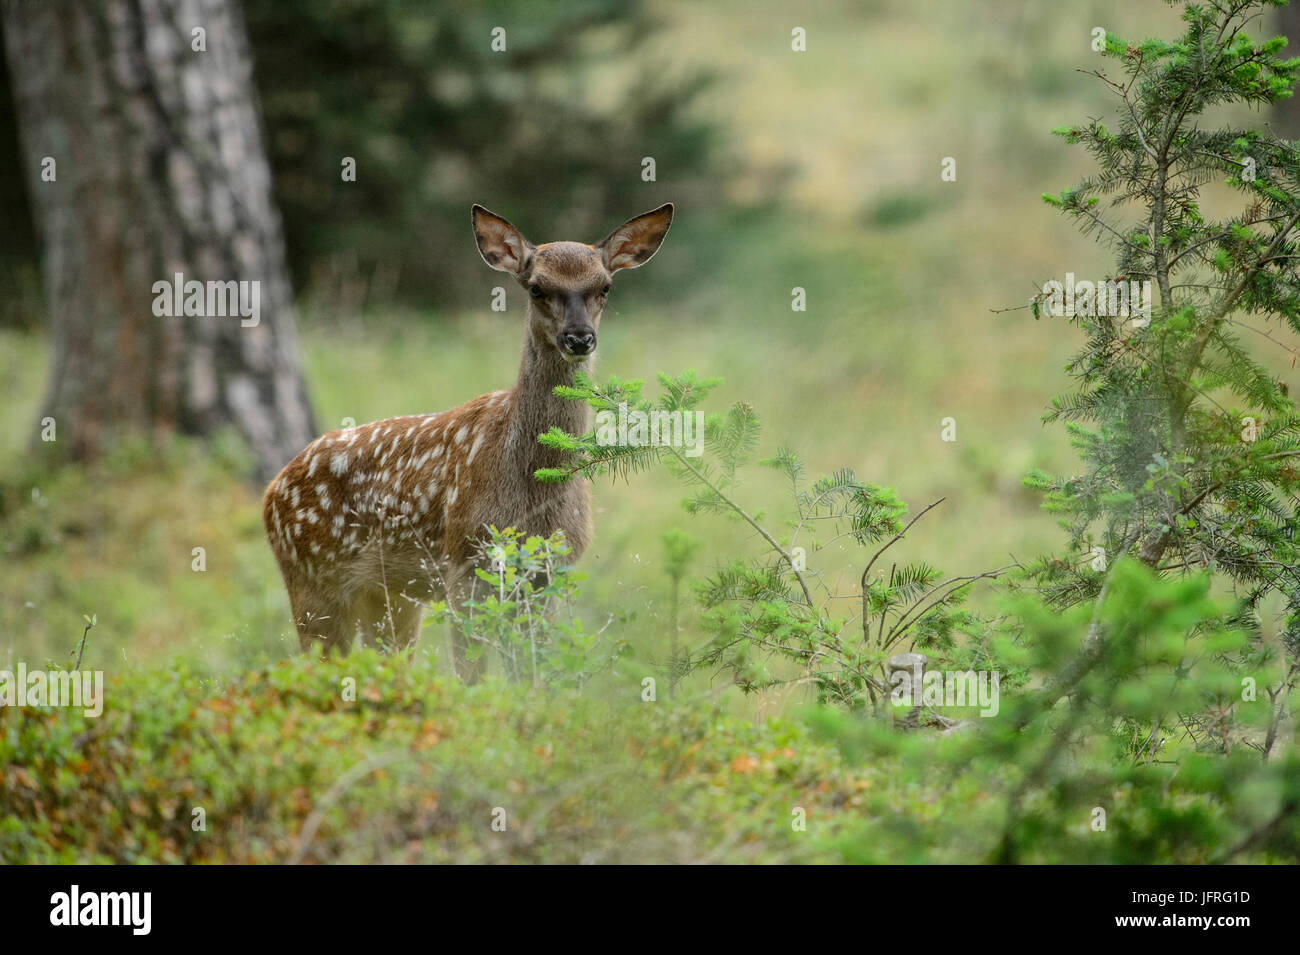 Red Deer vitello con spotted camouflage fur in una foresta in campo. Hoge Veluwe National Park, Paesi Bassi Foto Stock